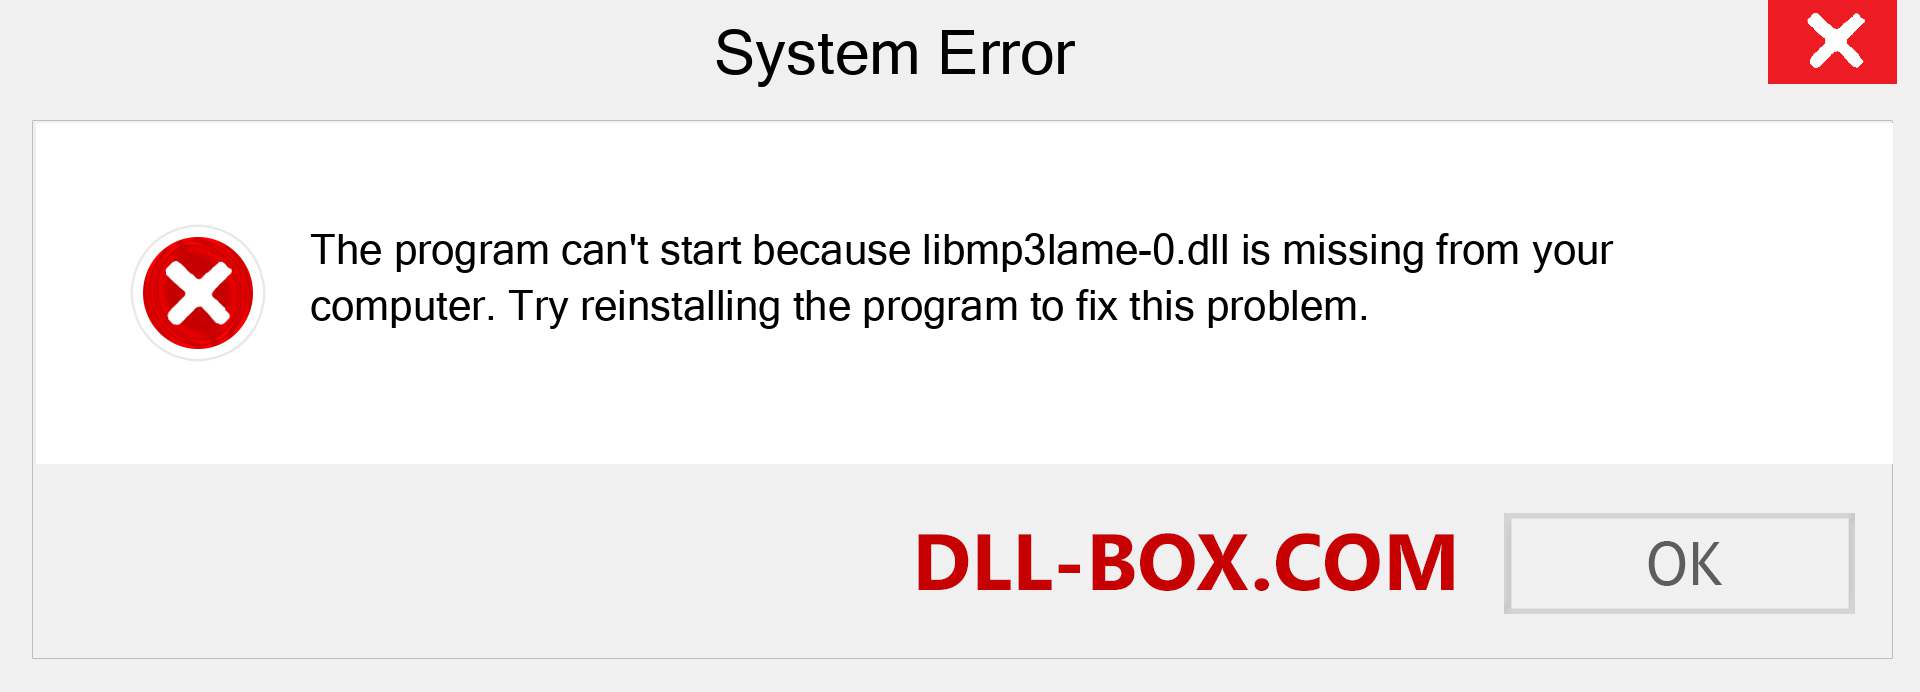  libmp3lame-0.dll file is missing?. Download for Windows 7, 8, 10 - Fix  libmp3lame-0 dll Missing Error on Windows, photos, images